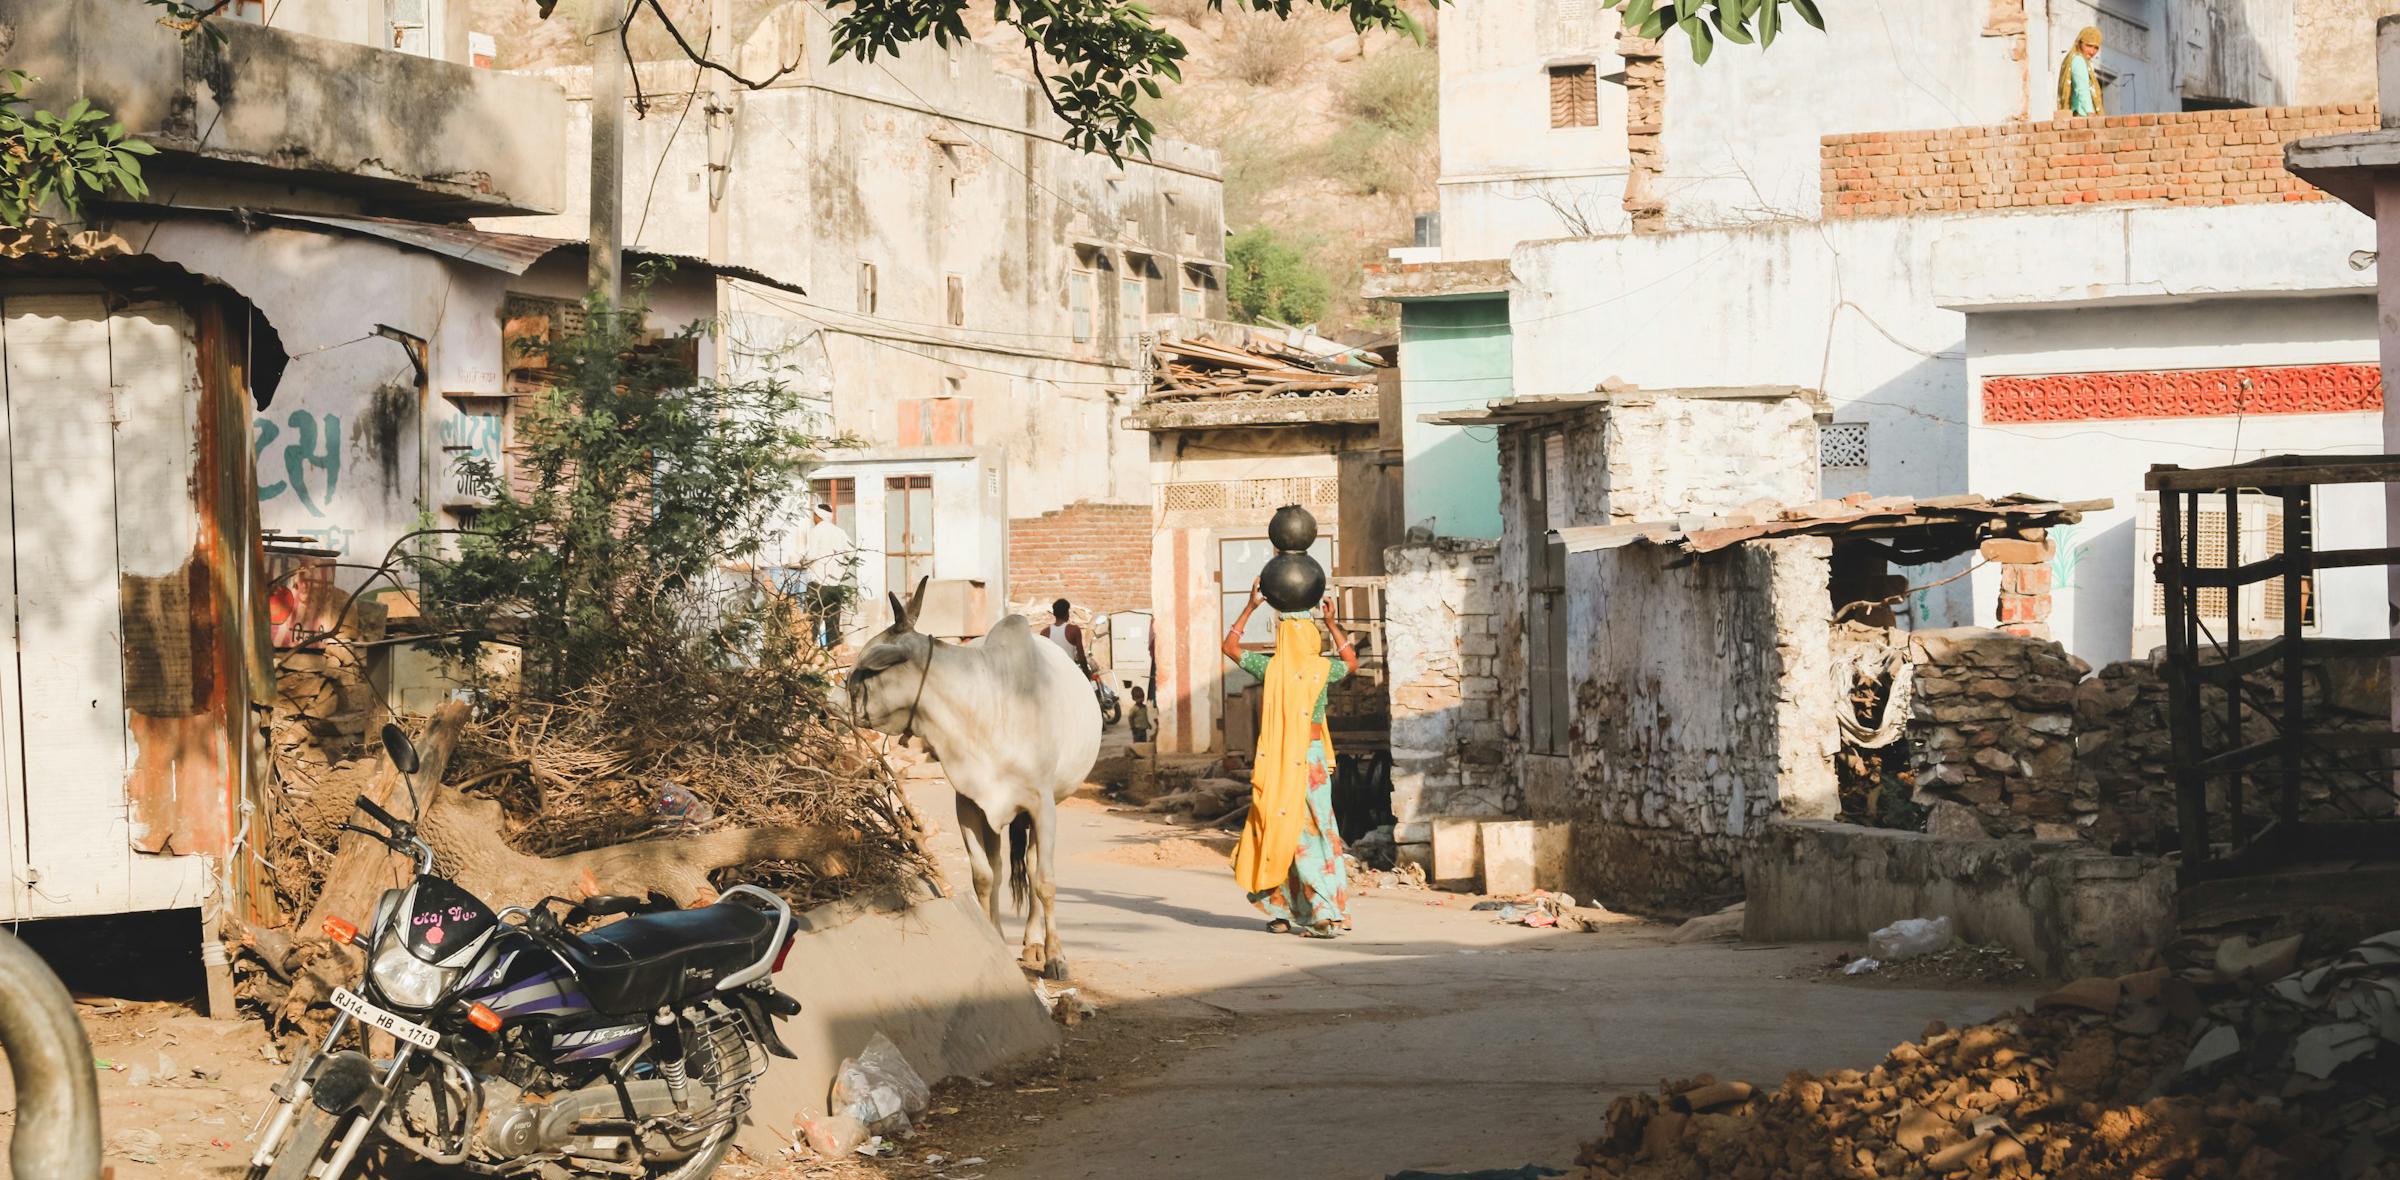 View of rural Indian village street with donkey, motorbike and woman carrying pot. 